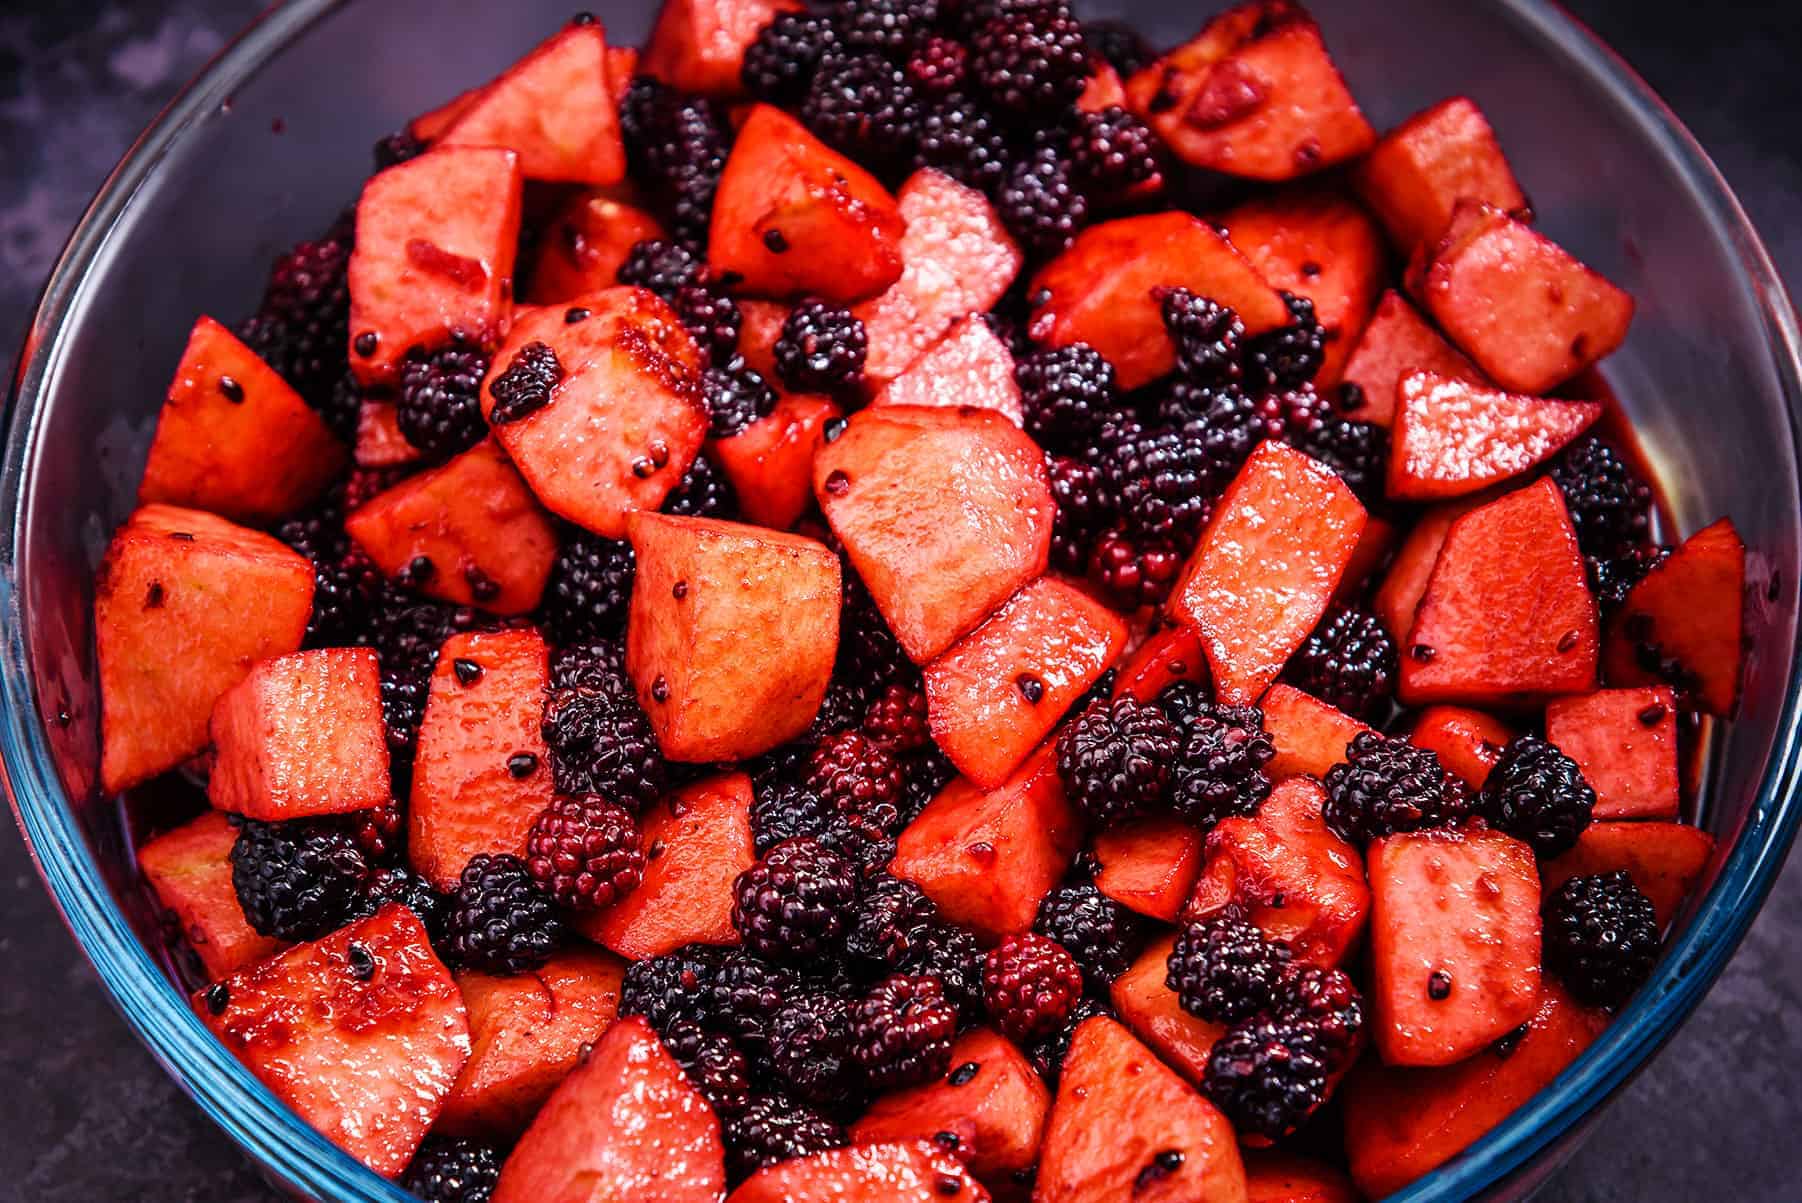 Apple and blackberry mixture in an ovenproof dish